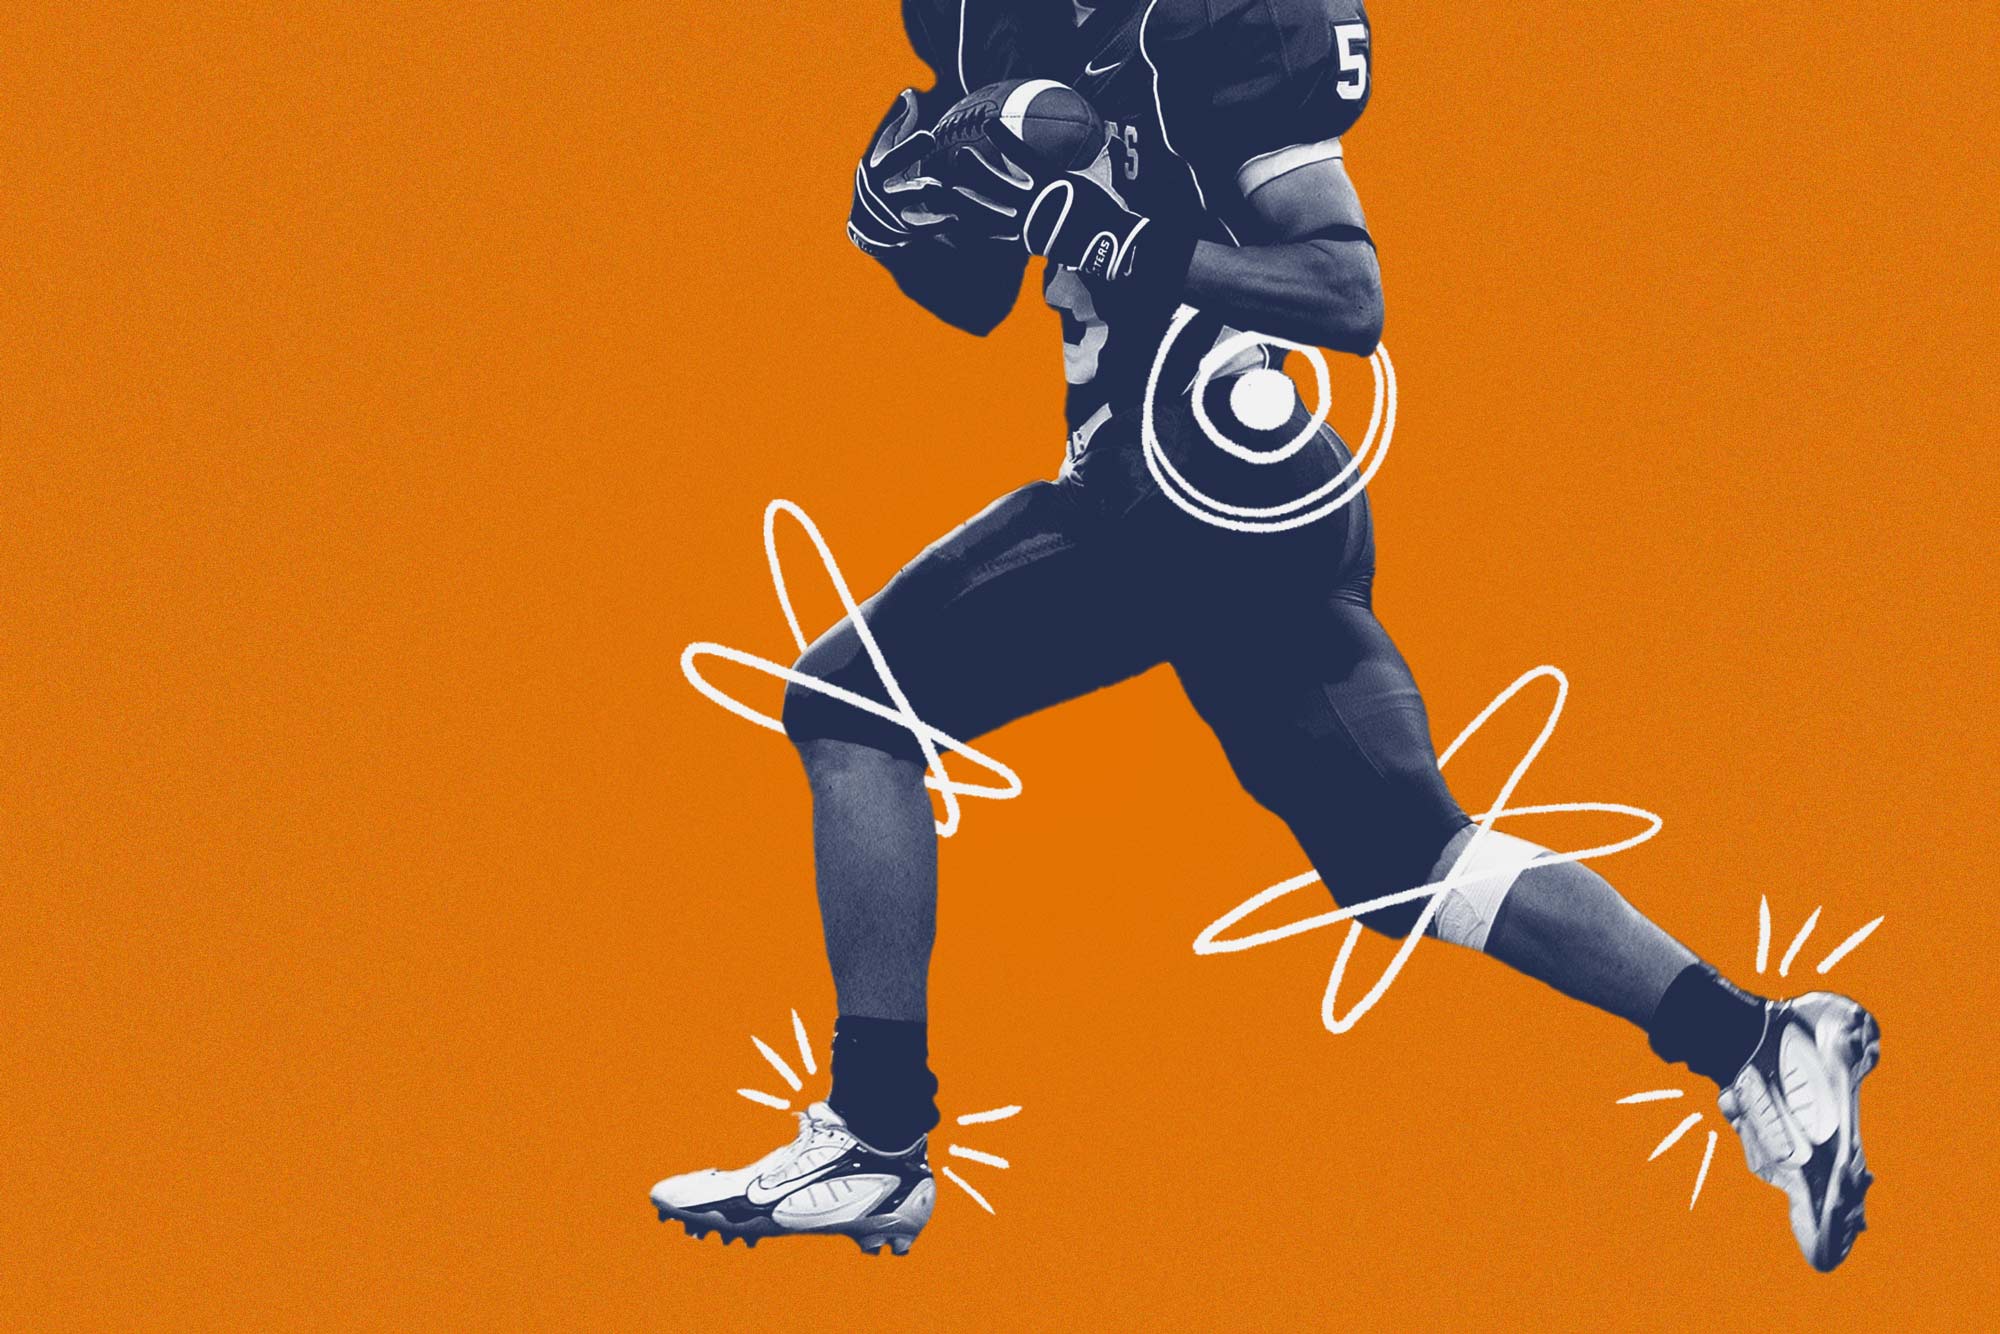 Illustration of a football player with an injured back, knees, and ankles